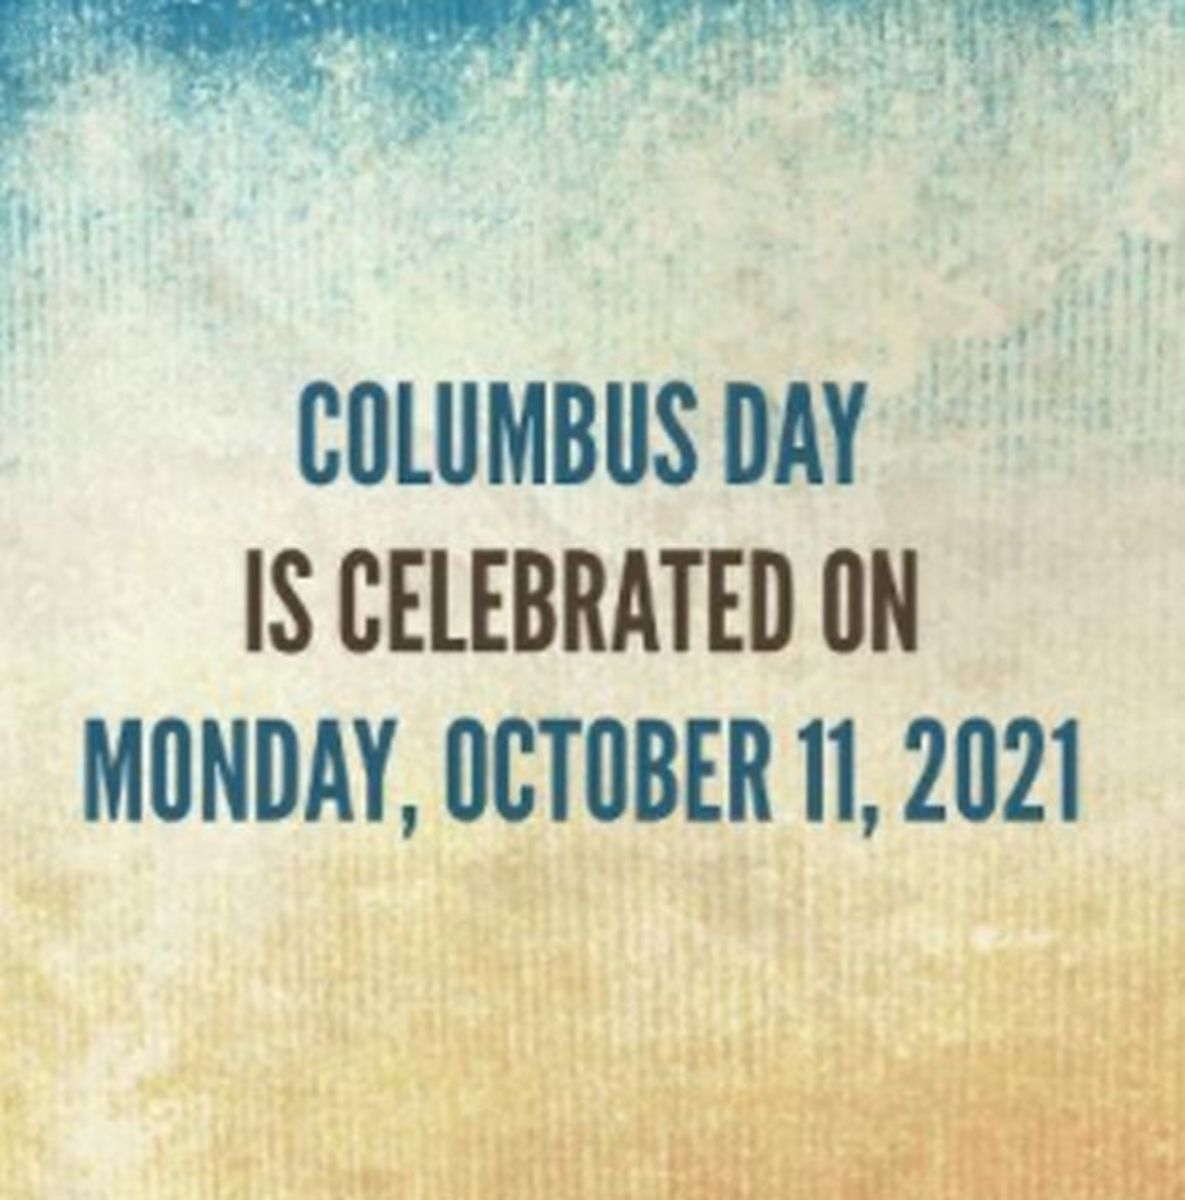 Colombus Day facts